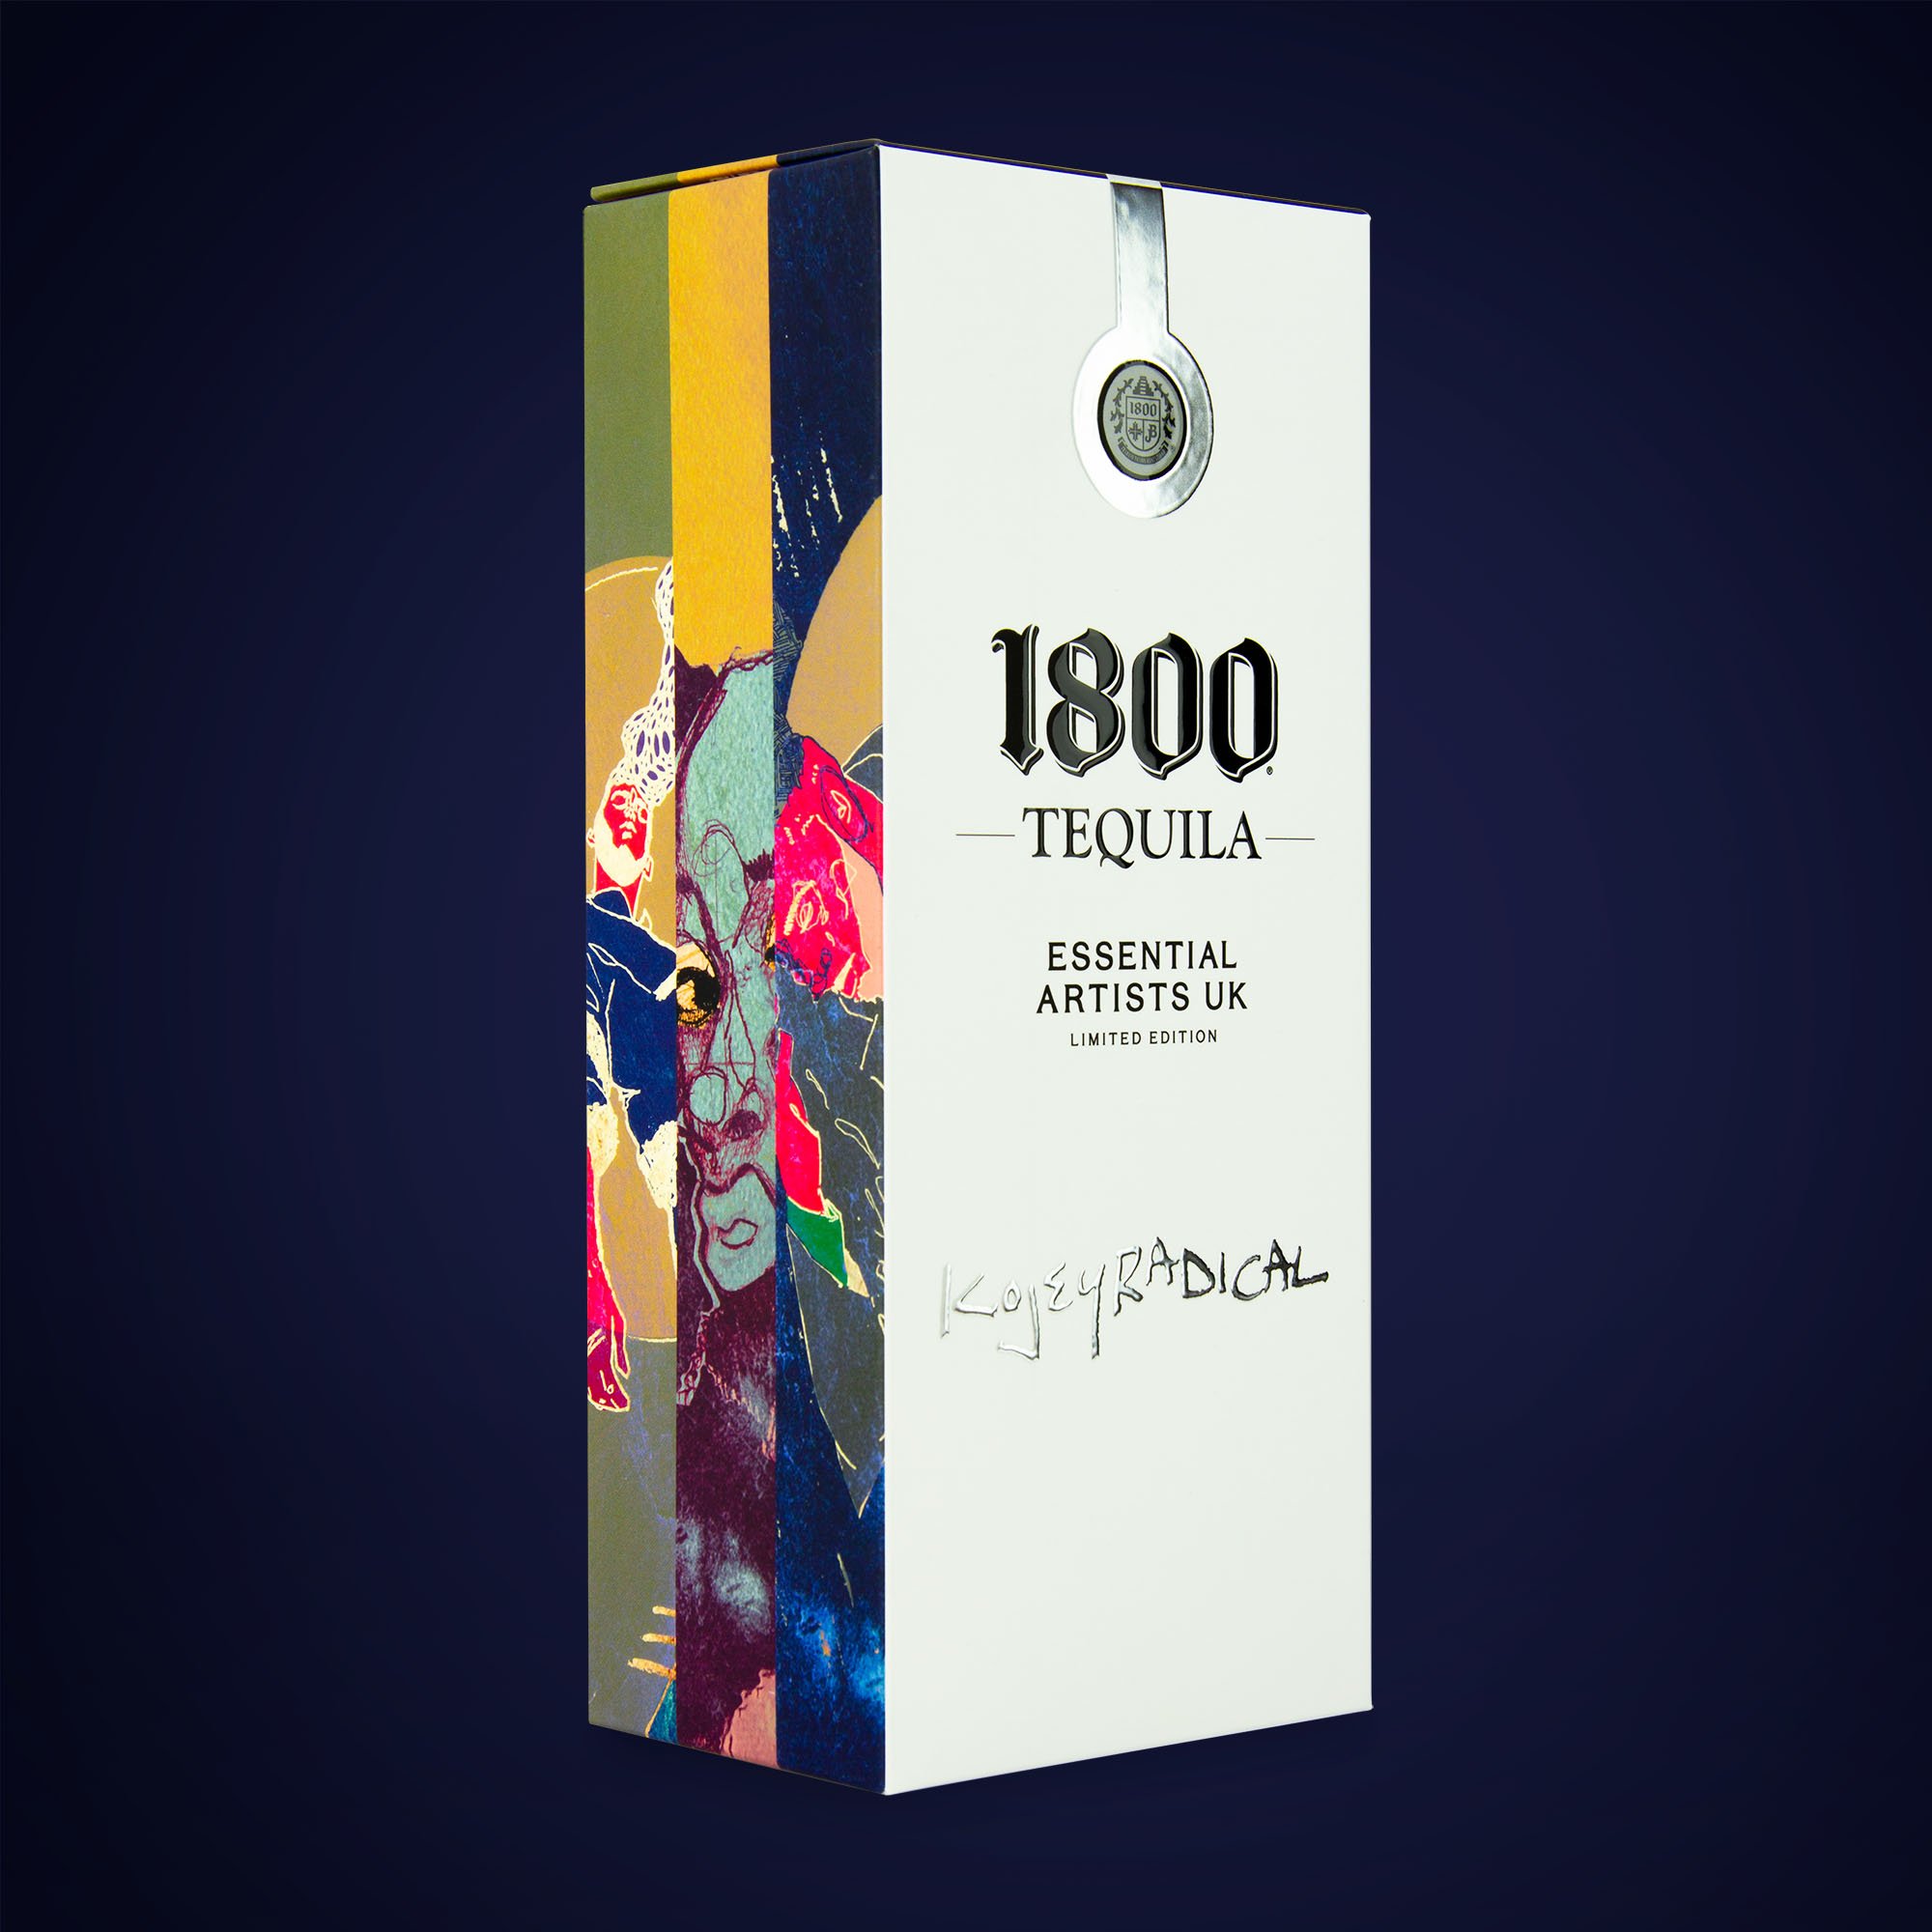 Kojey-Radical-1800-Tequila-artists-Edition-Collectable-Packaging-Design-Square.jpg